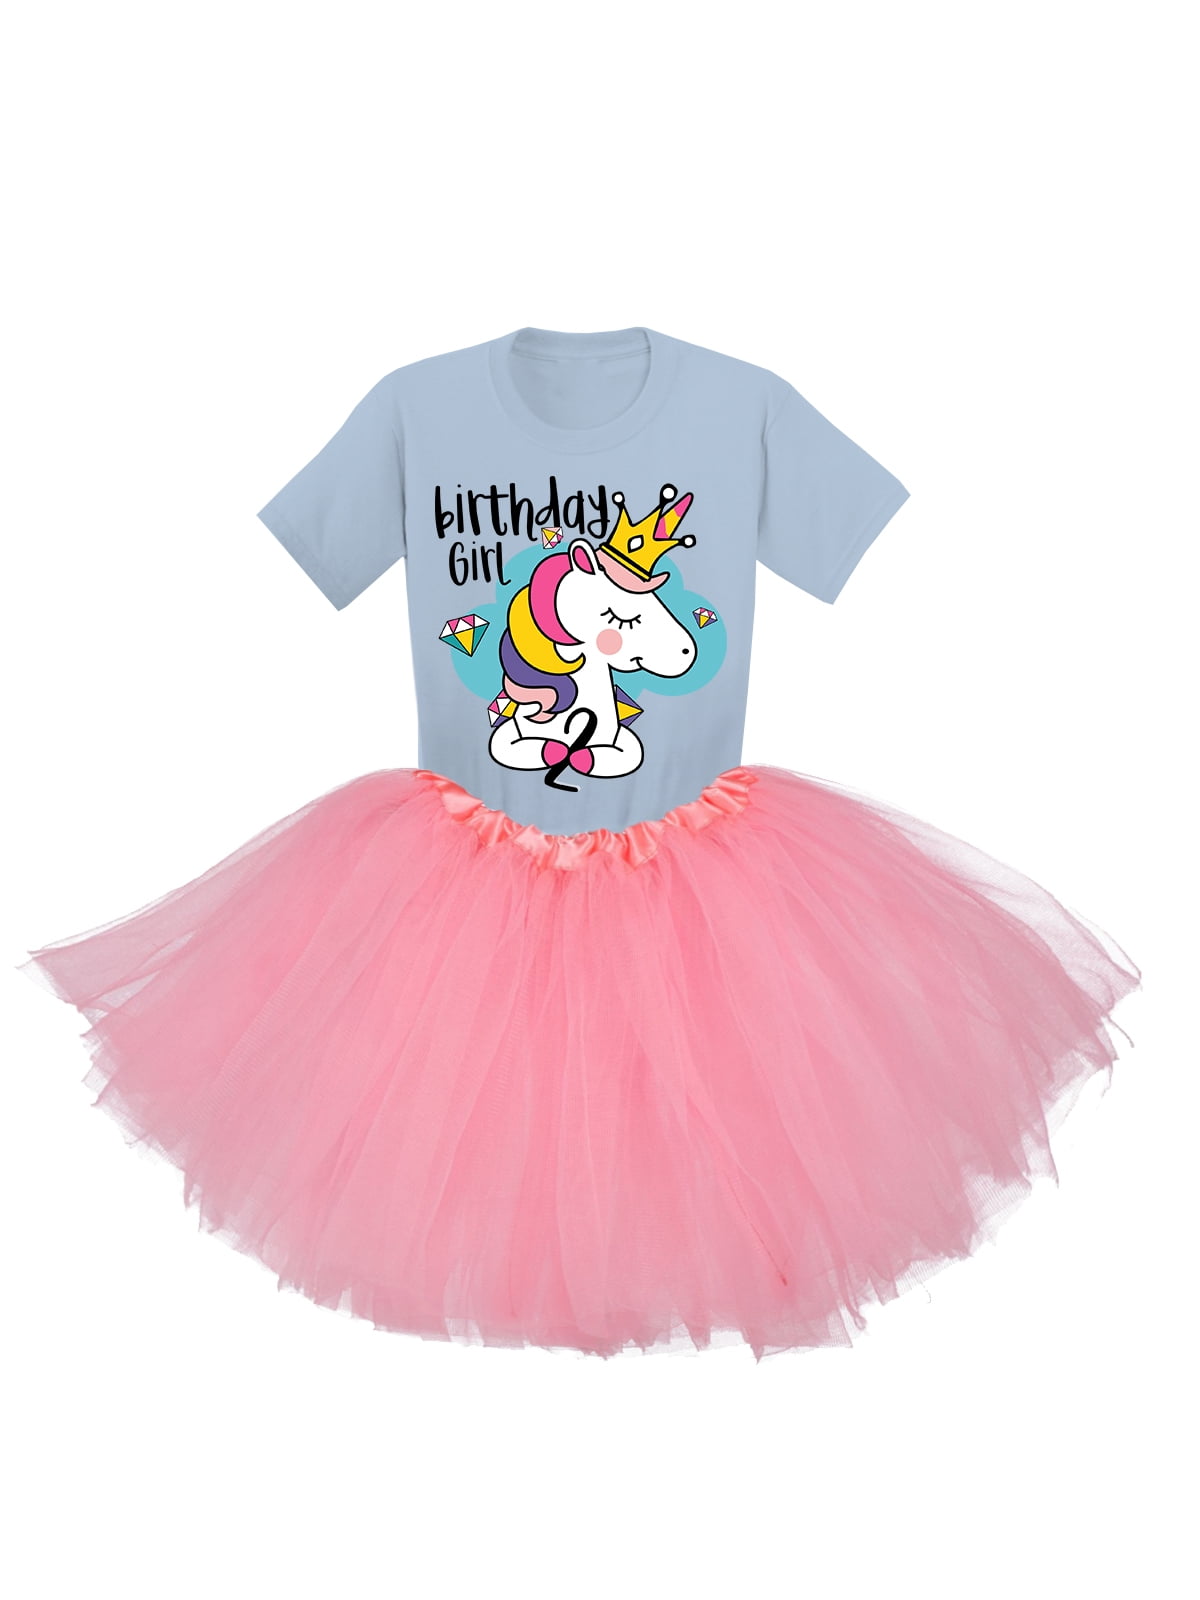 2 year old birthday tutu outfit